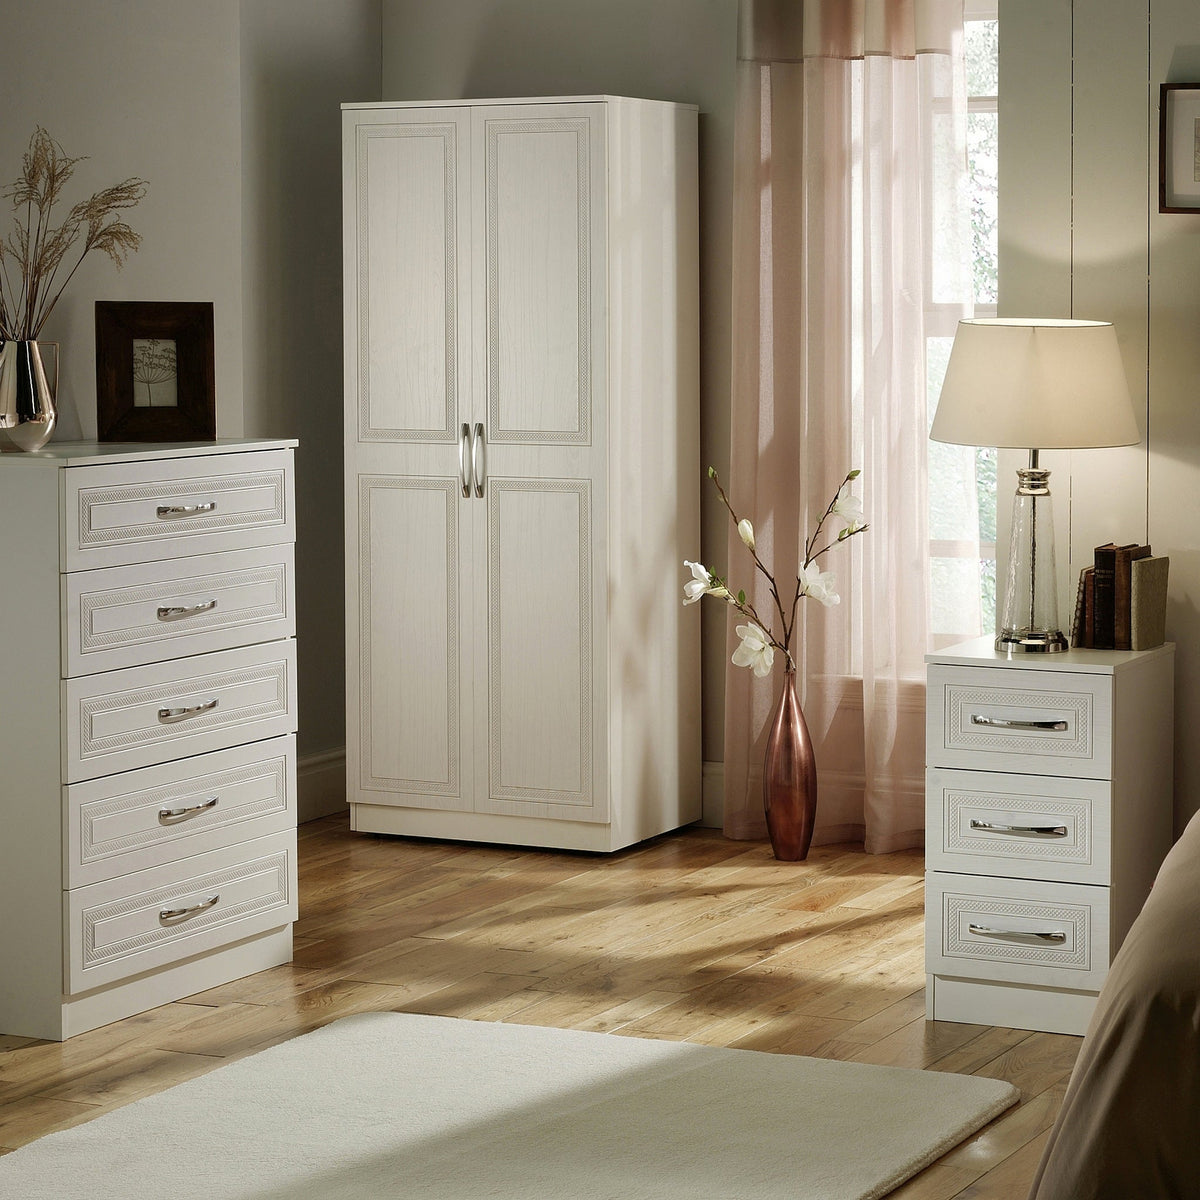 Killgarth White Wireless Charging 3 Drawer Bedside Cabinet for bedroom